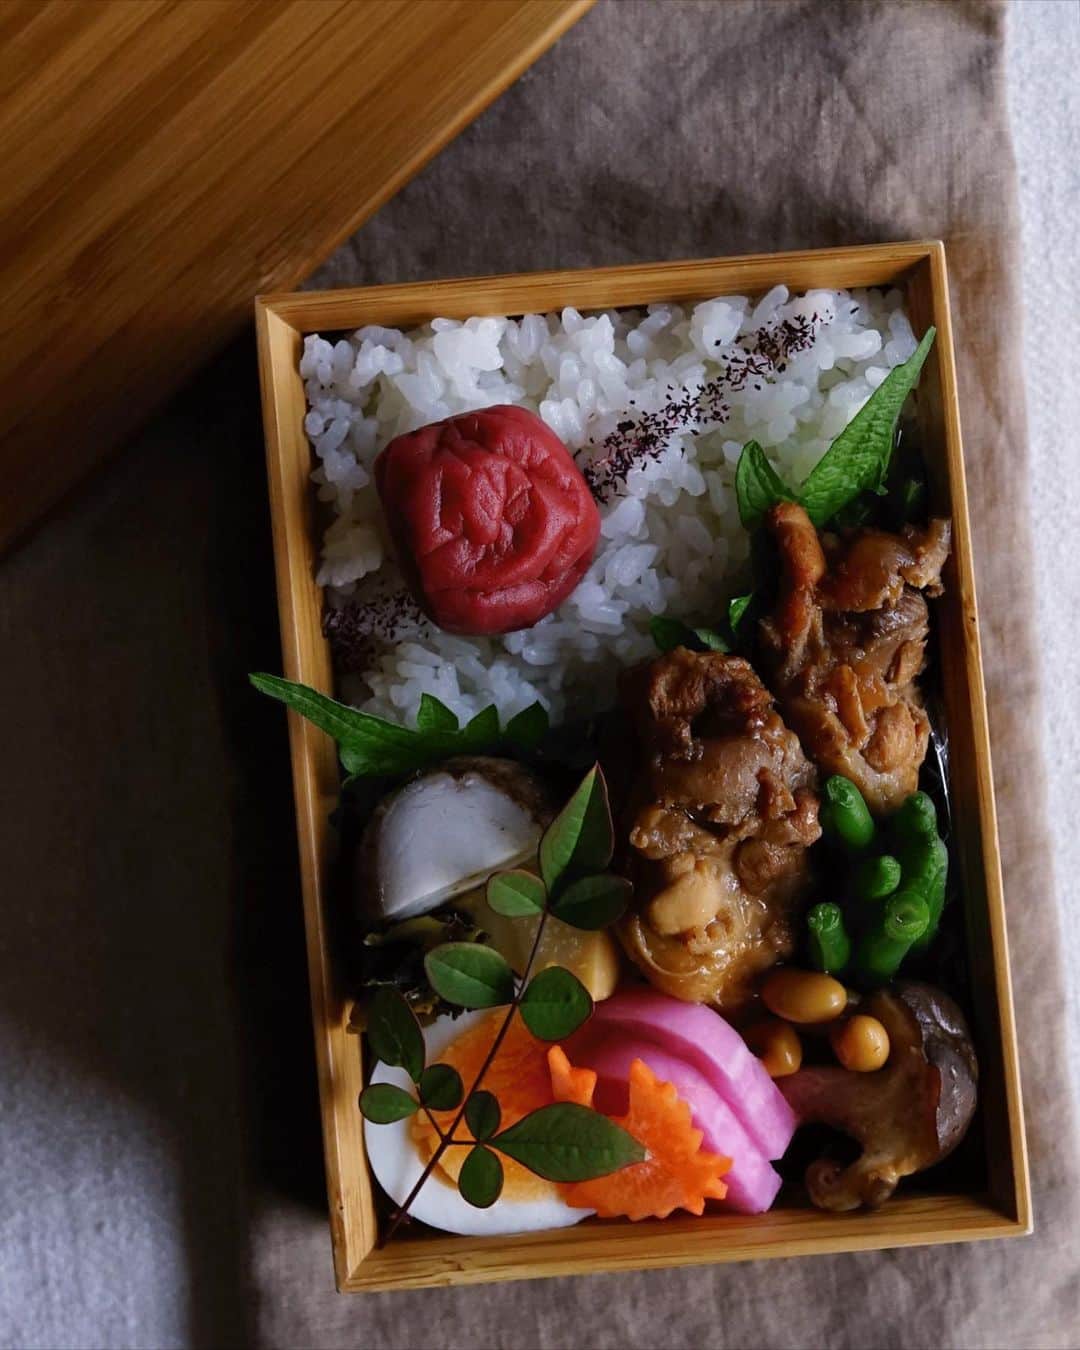 Ryoko Yunokiのインスタグラム：「+ + + Soy-simmered chicken and soy beans bento/鶏肉と大豆の醤油煮弁当 . *rice and umeboshi *soy-simmered chicken and soy beans with green beans and shiitake *steamed taro root *dashi-simmered bamboo shoots *hard-boiled egg *pickled red radish . ＊ご飯と梅干し ＊鶏肉と大豆の醤油煮 ＊蒸し里芋 ＊筍の出汁煮 ＊ゆで卵 ＊赤蕪の漬物 + + + #bento #お弁当 #丸の内弁当 #f52grams #公長齋小菅」